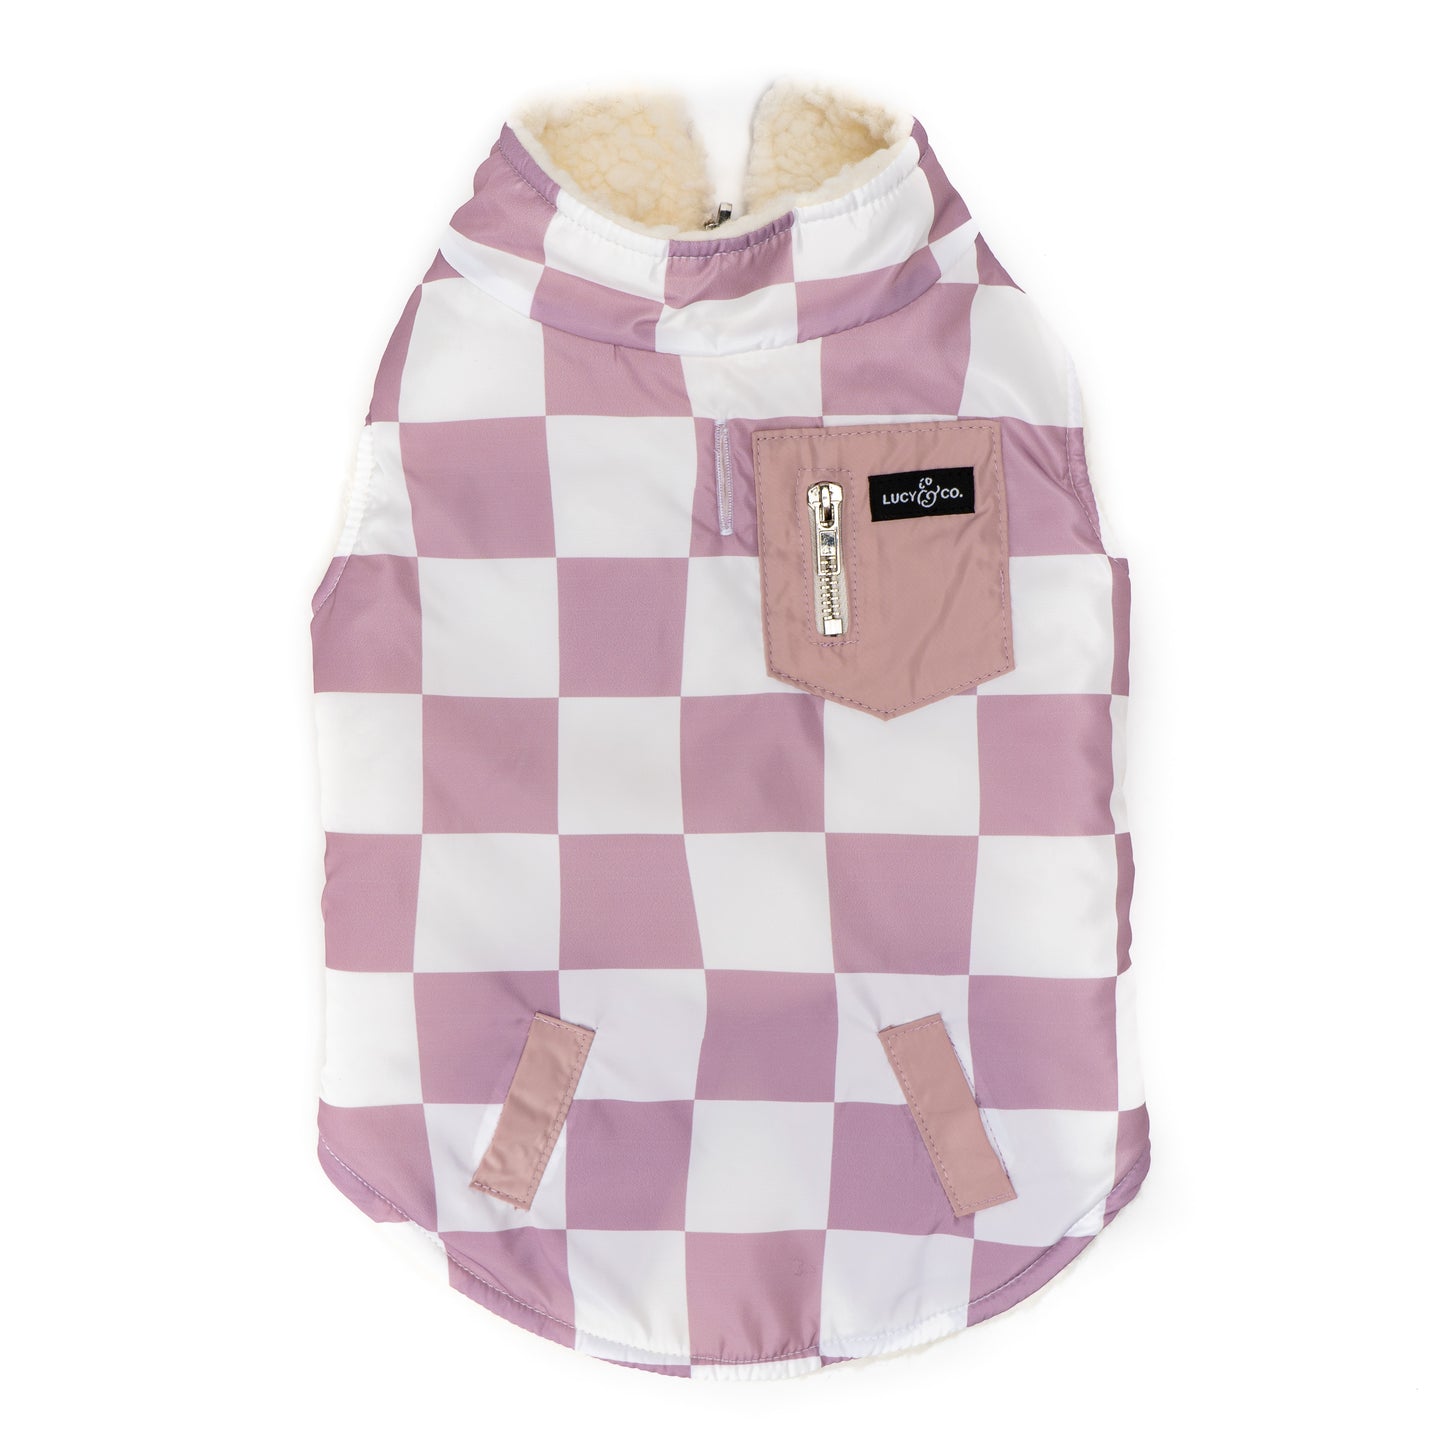 The Checked Out Reversible Teddy Vest